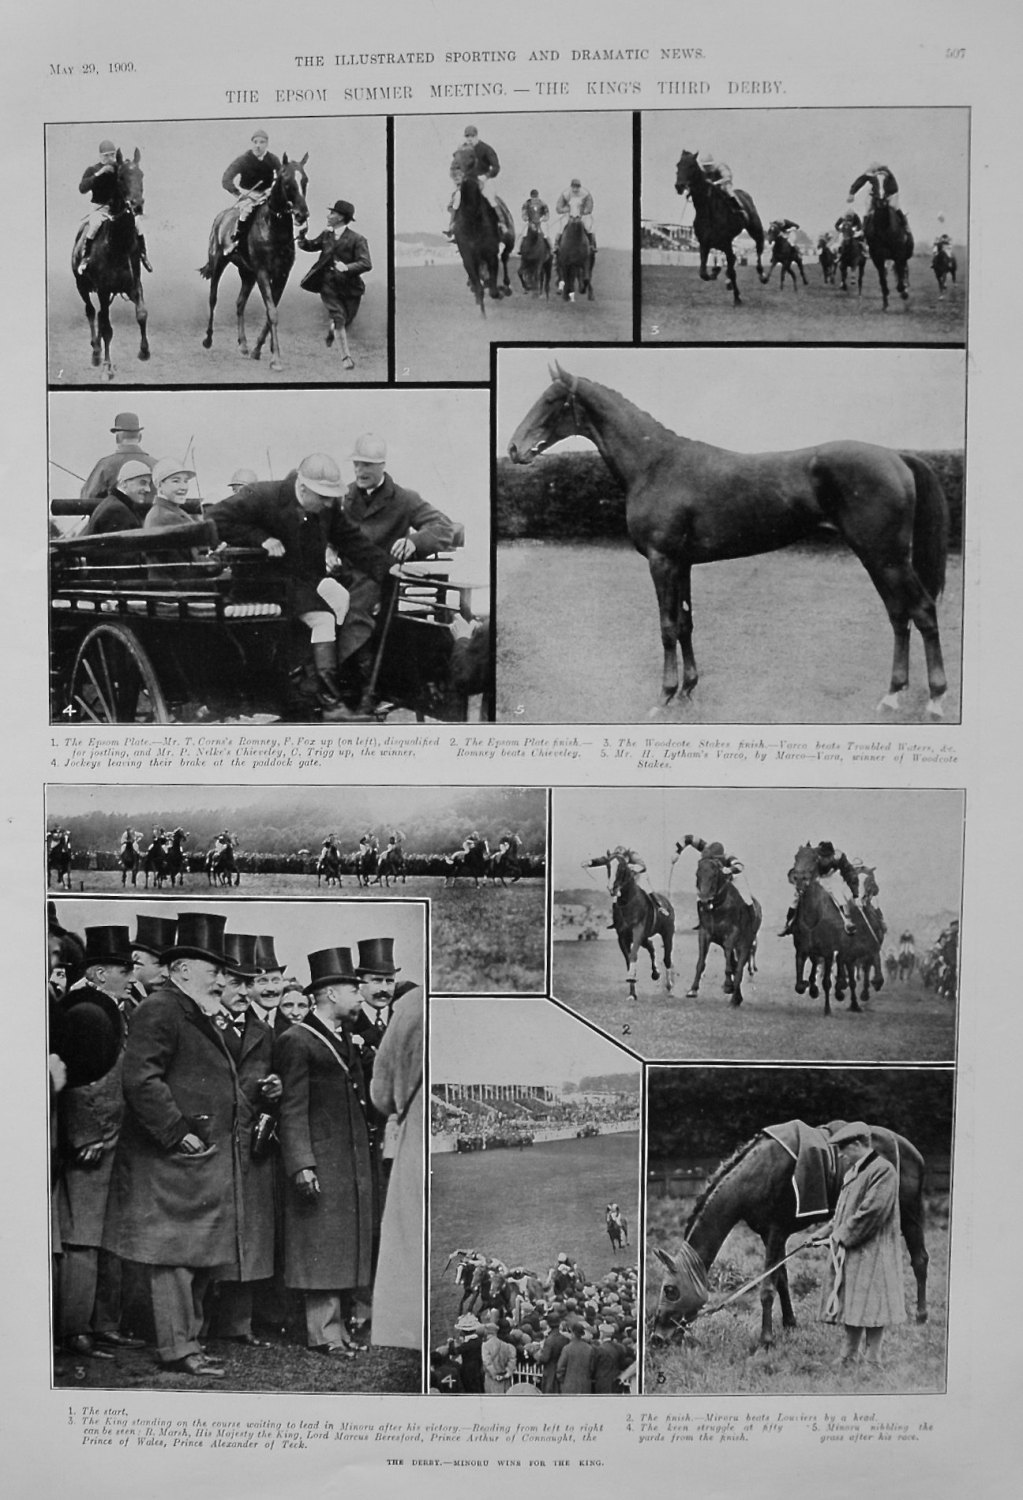 Epsom Summer Meeting. - The King's Third Derby. 1909